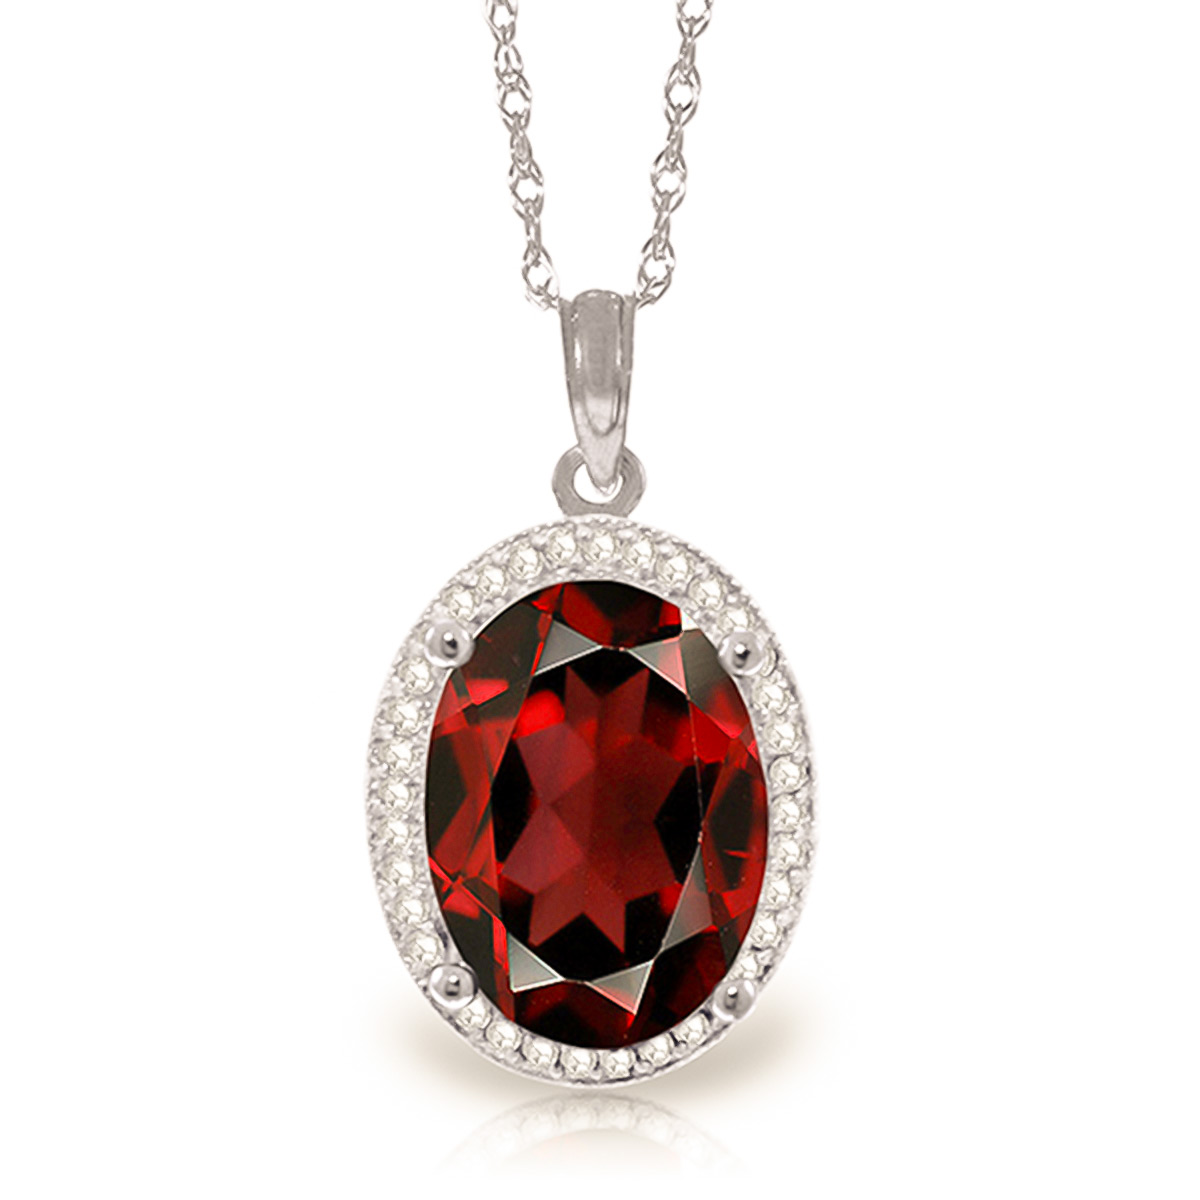 Garnet Halo Pendant Necklace 6.23 ctw in 9ct White Gold